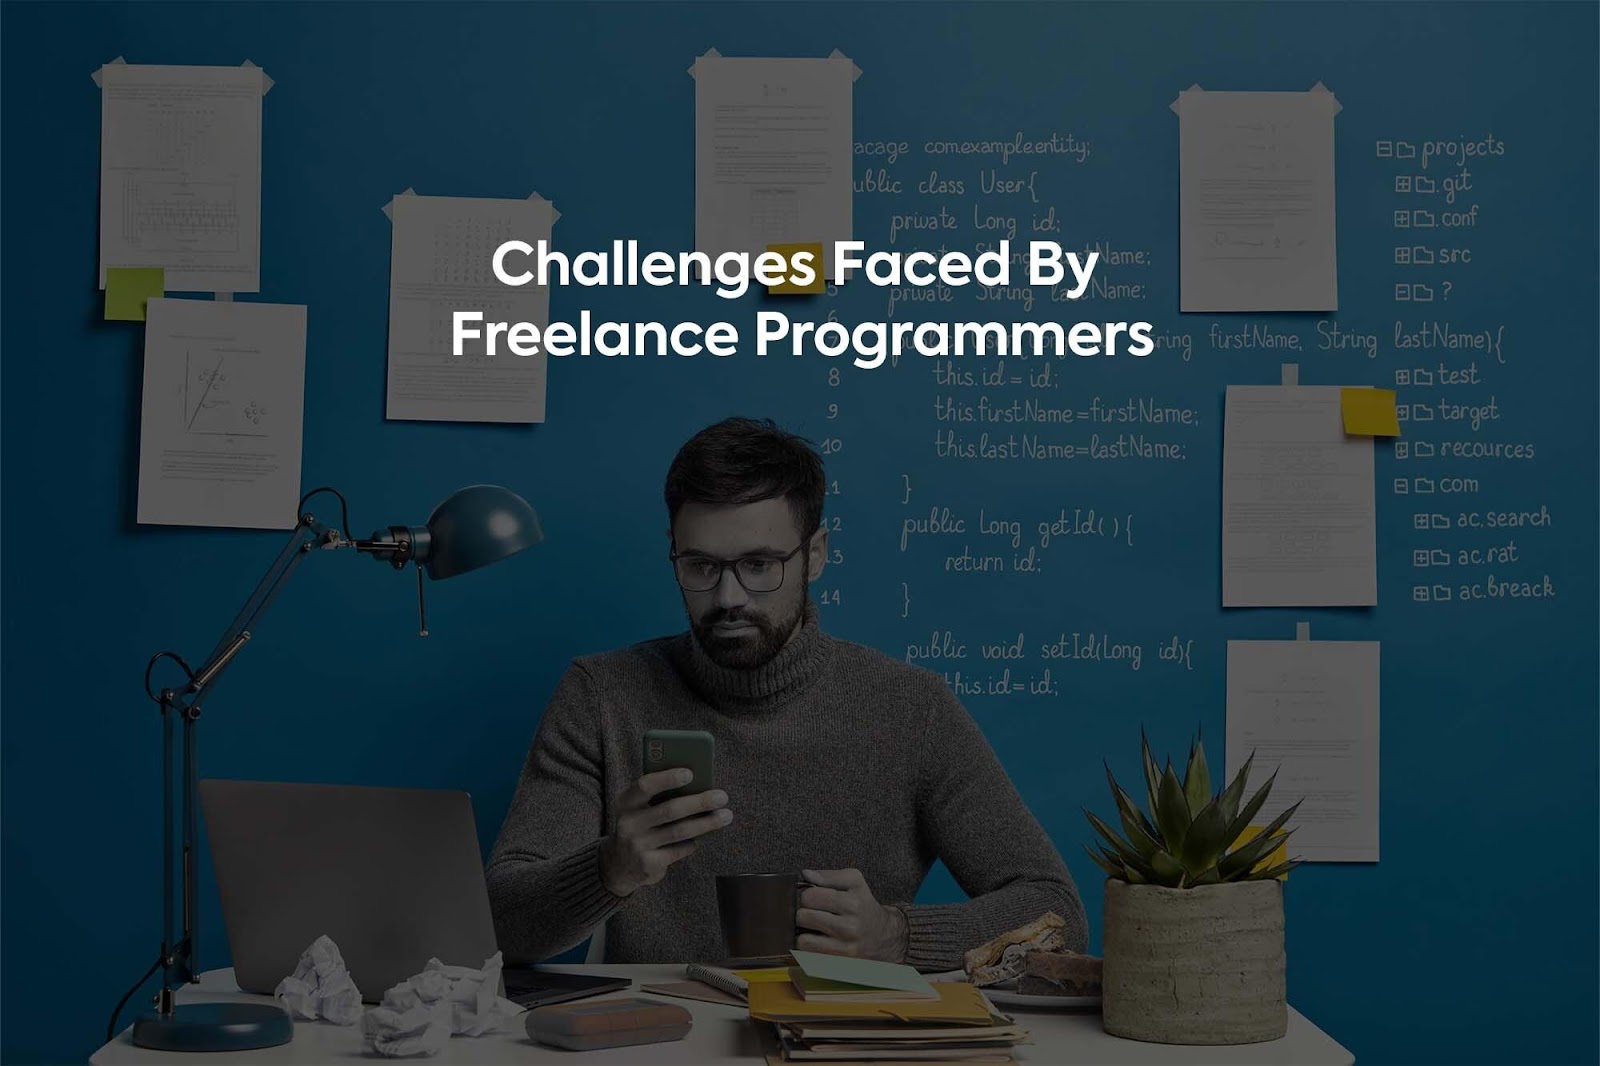 Challenges faced by freelance programmers - How to become a freelance programmer